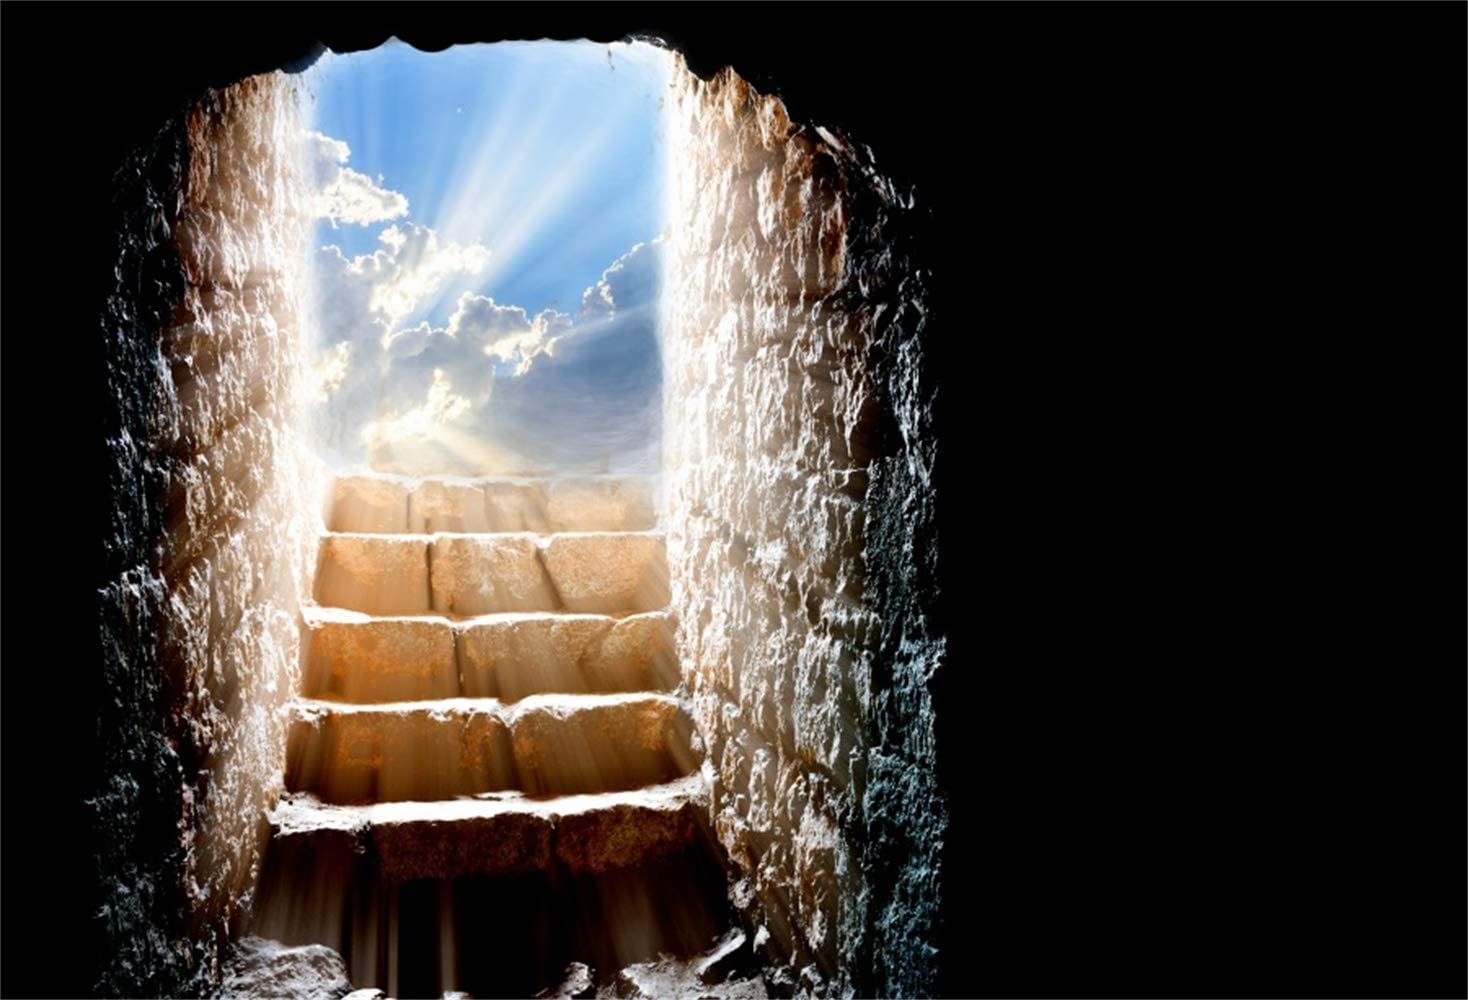 10x7ft Easter Resurrection Backdrop Vinyl Jesus Christ Rebirth Empty Tomb Light Rays from The Clouds Scene Background Christian Belief Trinity Church Activities Mural Wallpaper: Amazon.ca: Camera & Photo